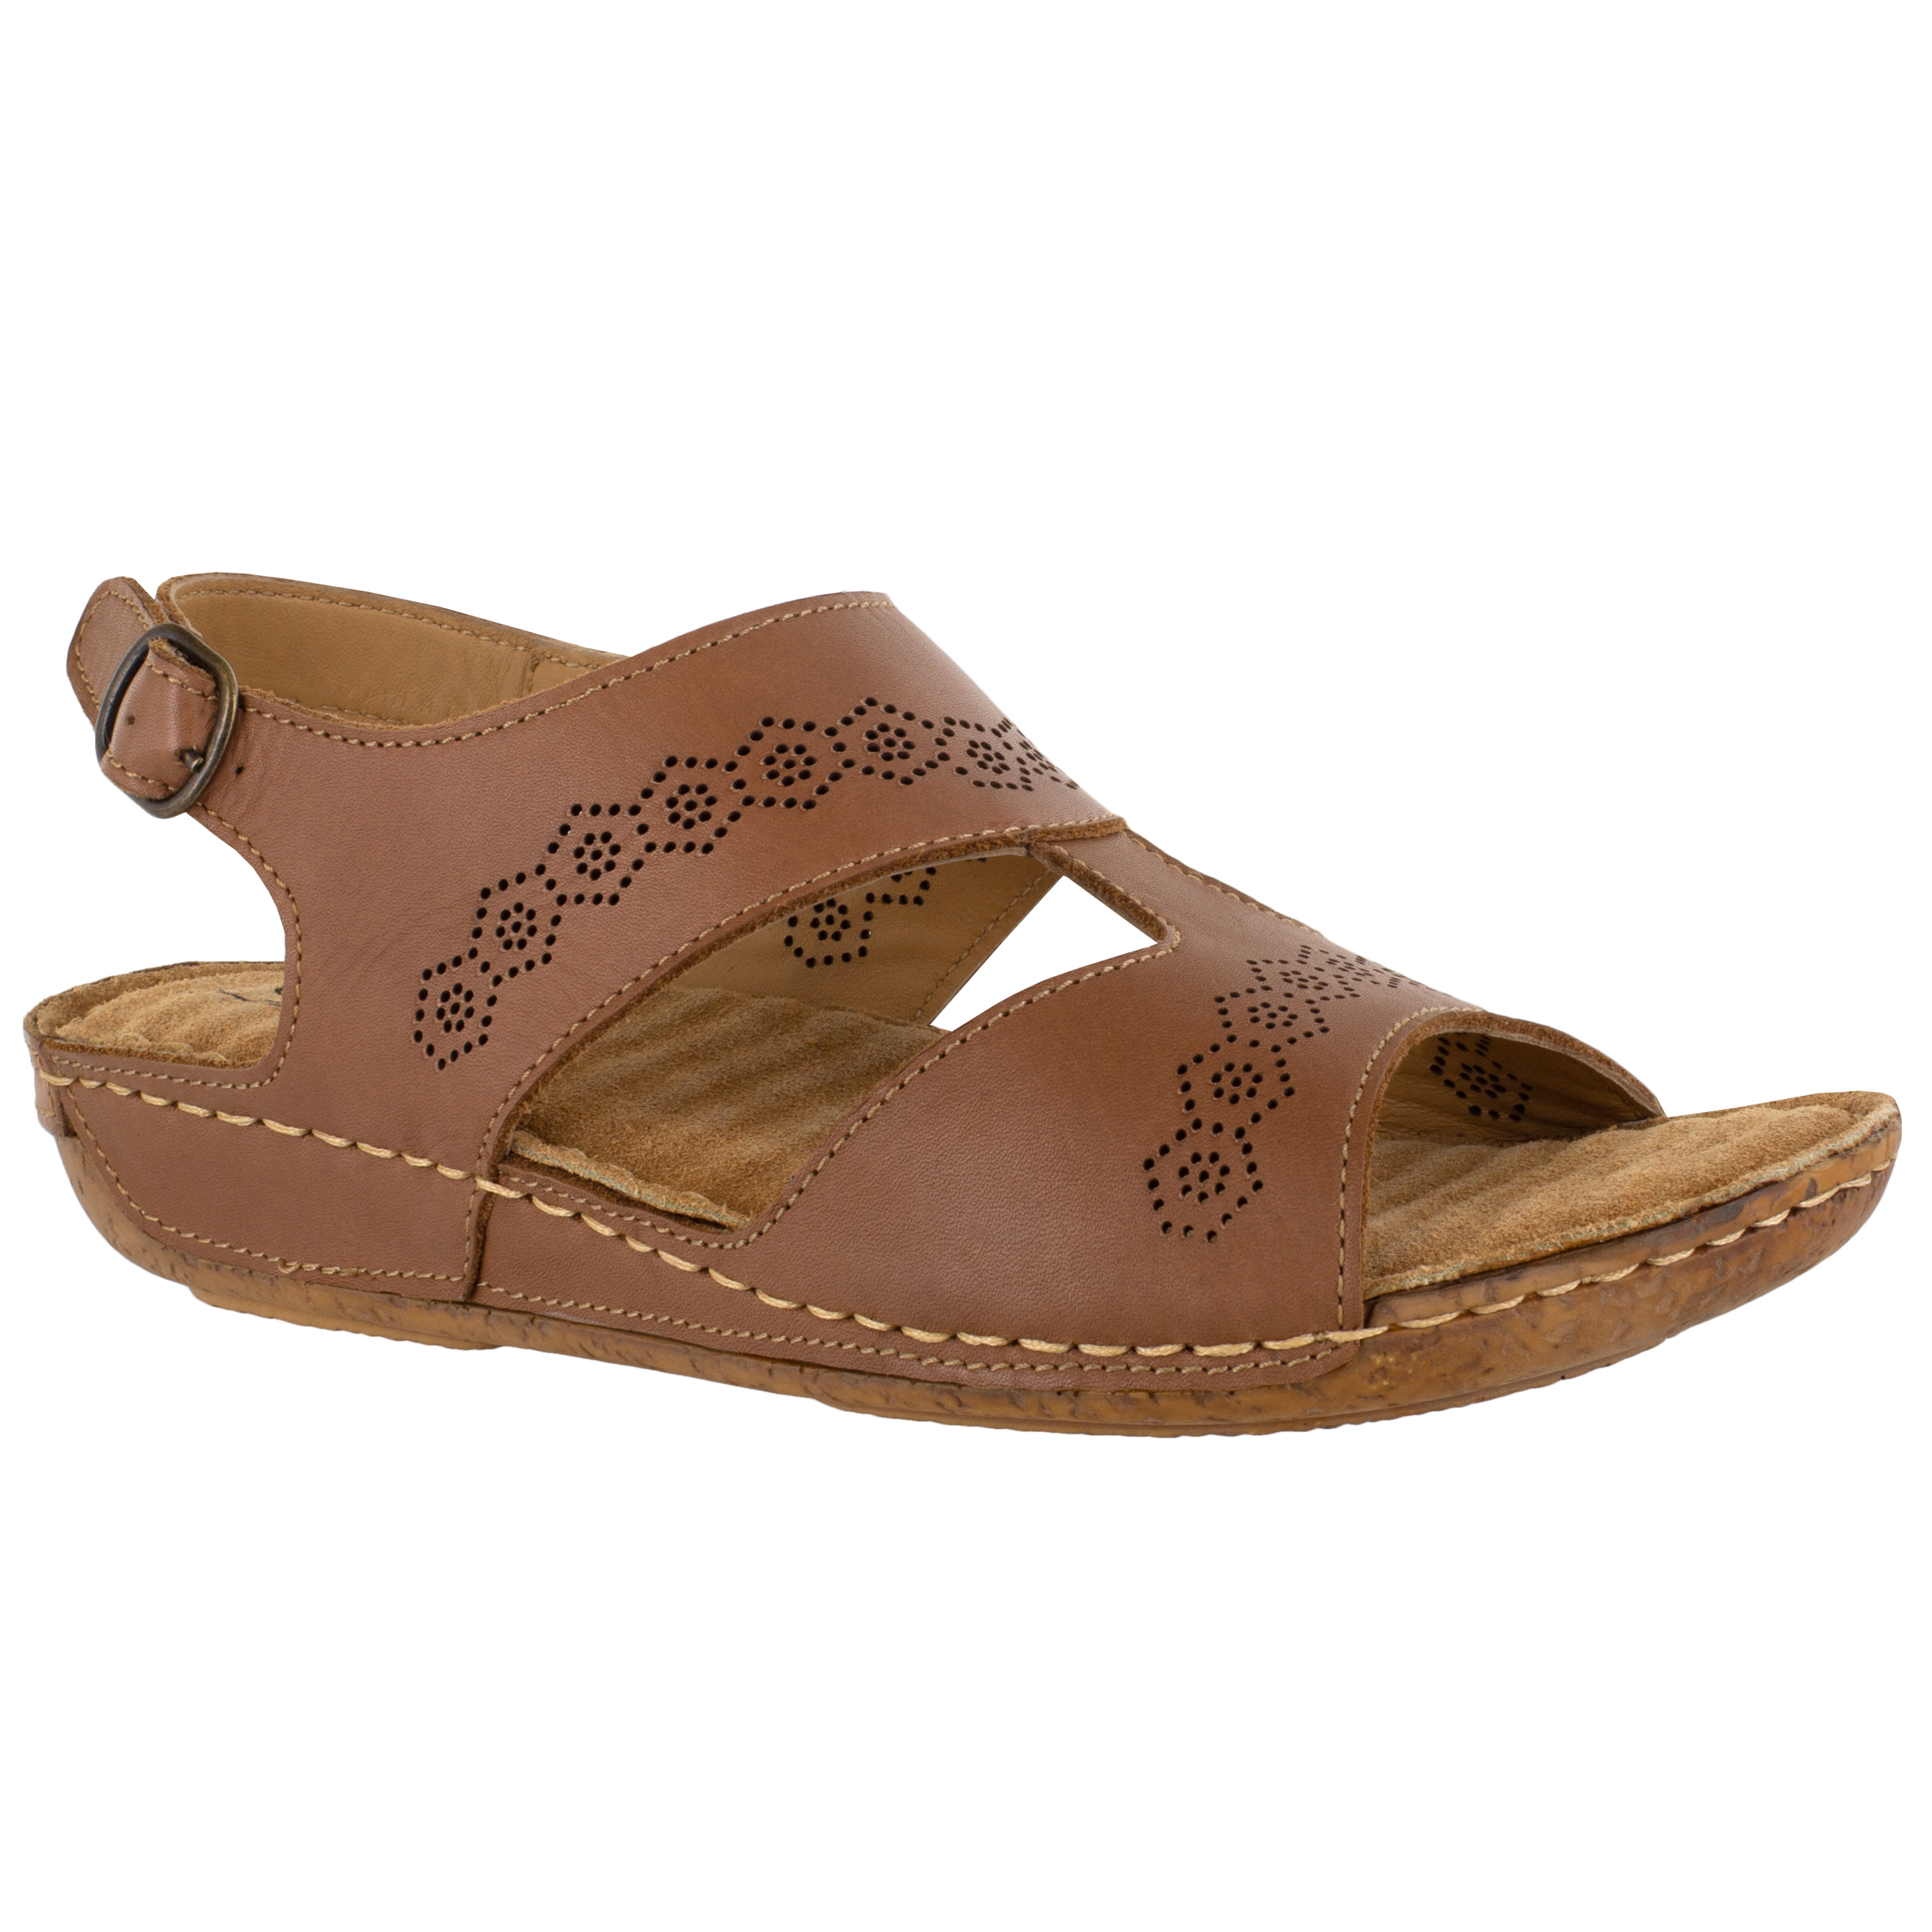 Comfort Wave by Easy Street Sloane Leather Sandals (Women) - image 1 of 7